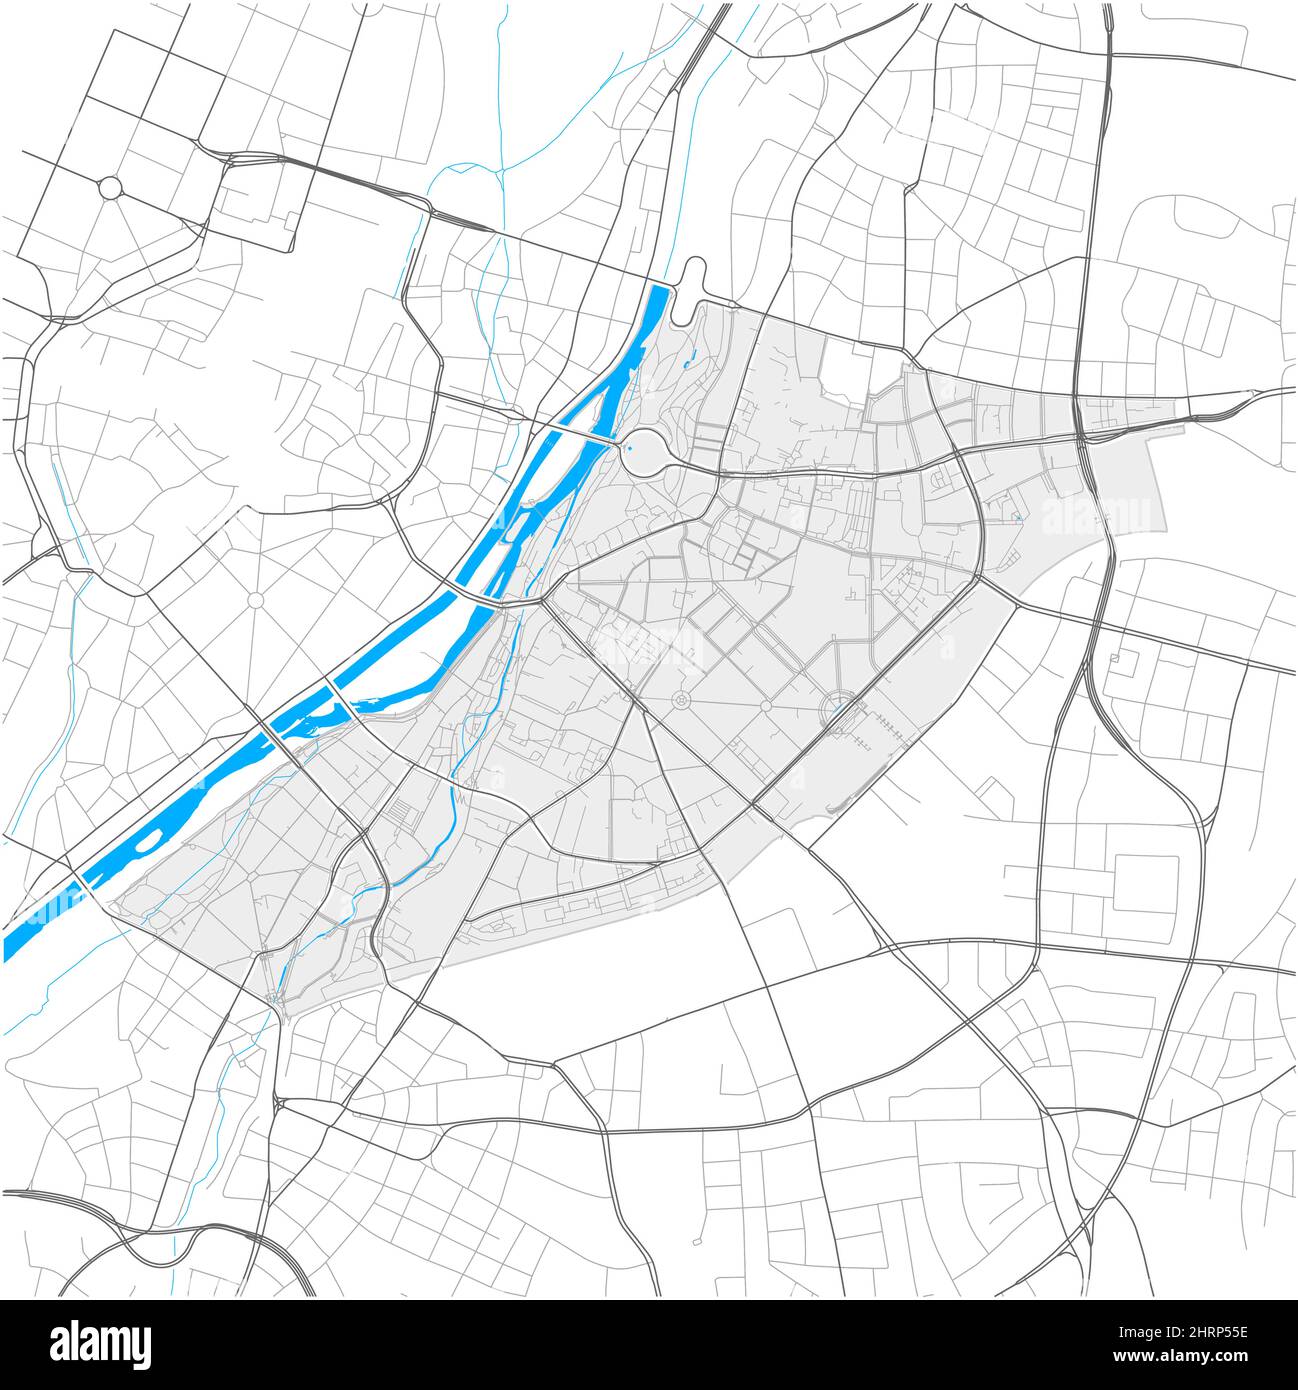 Au-Haidhausen, München, DEUTSCHLAND, high detail vector map with city boundaries and editable paths. White outlines for main roads. Many smaller paths Stock Vector